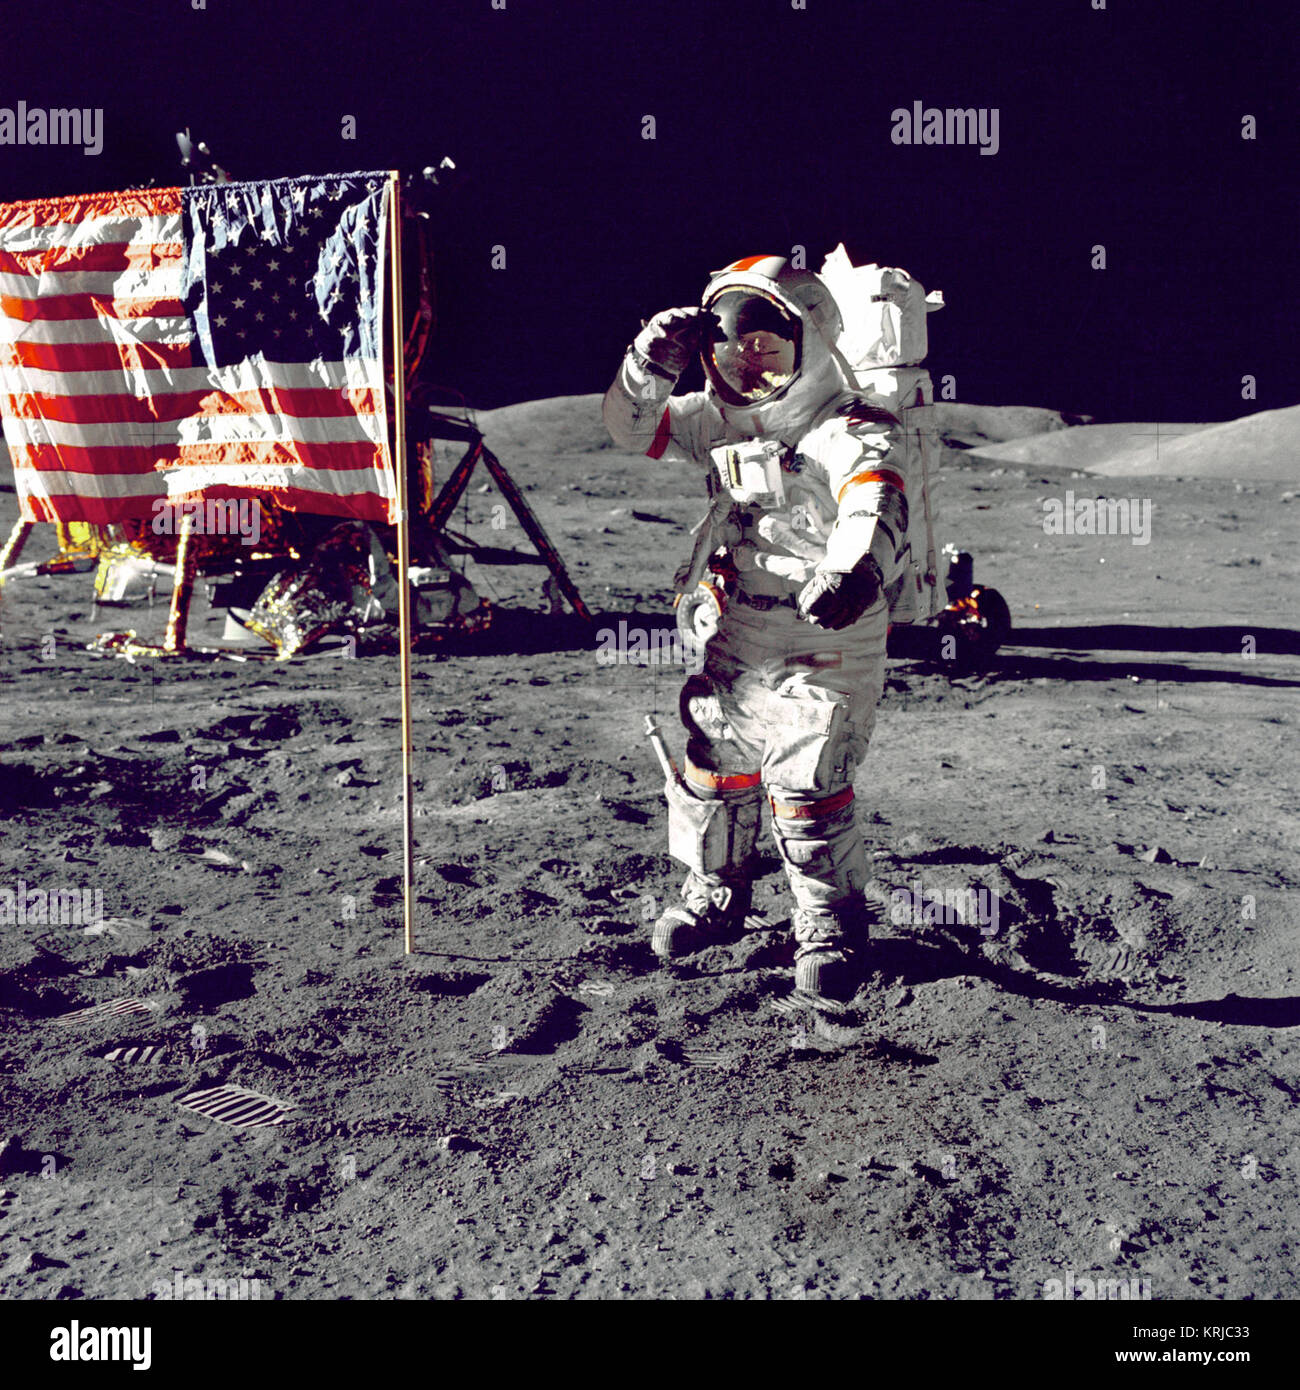 Eugene A. Cernan, Commander, Apollo 17 salutes the flag on the lunar surface during extravehicular activity (EVA) on NASA's final lunar landing mission. The Lunar Module 'Challenger' is in the left background behind the flag and the Lunar Roving Vehicle (LRV) also in background behind him. While astronauts Cernan and Schmitt descended in the Challenger to explore the Taurus-Littrow region of the Moon, astronaut Ronald E. Evans, Command Module pilot, remained with the Command/Service Module (CSM) 'America' in lunar-orbit. Cernan Jump Salutes Flag (9460247018) Stock Photo